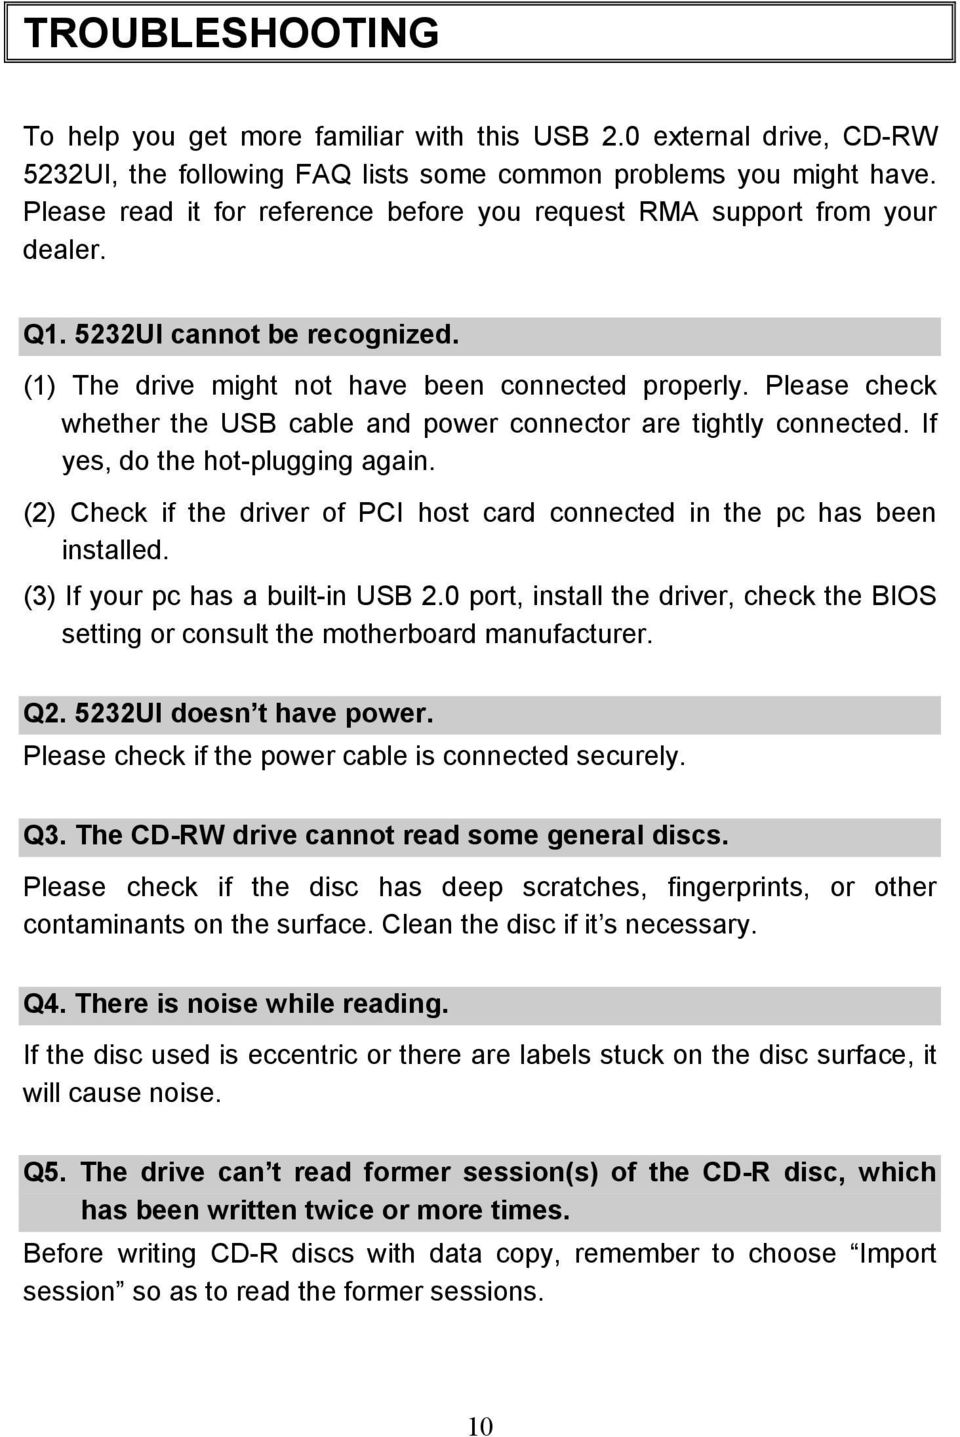 Please check whether the USB cable and power connector are tightly connected. If yes, do the hot-plugging again. (2) Check if the driver of PCI host card connected in the pc has been installed.